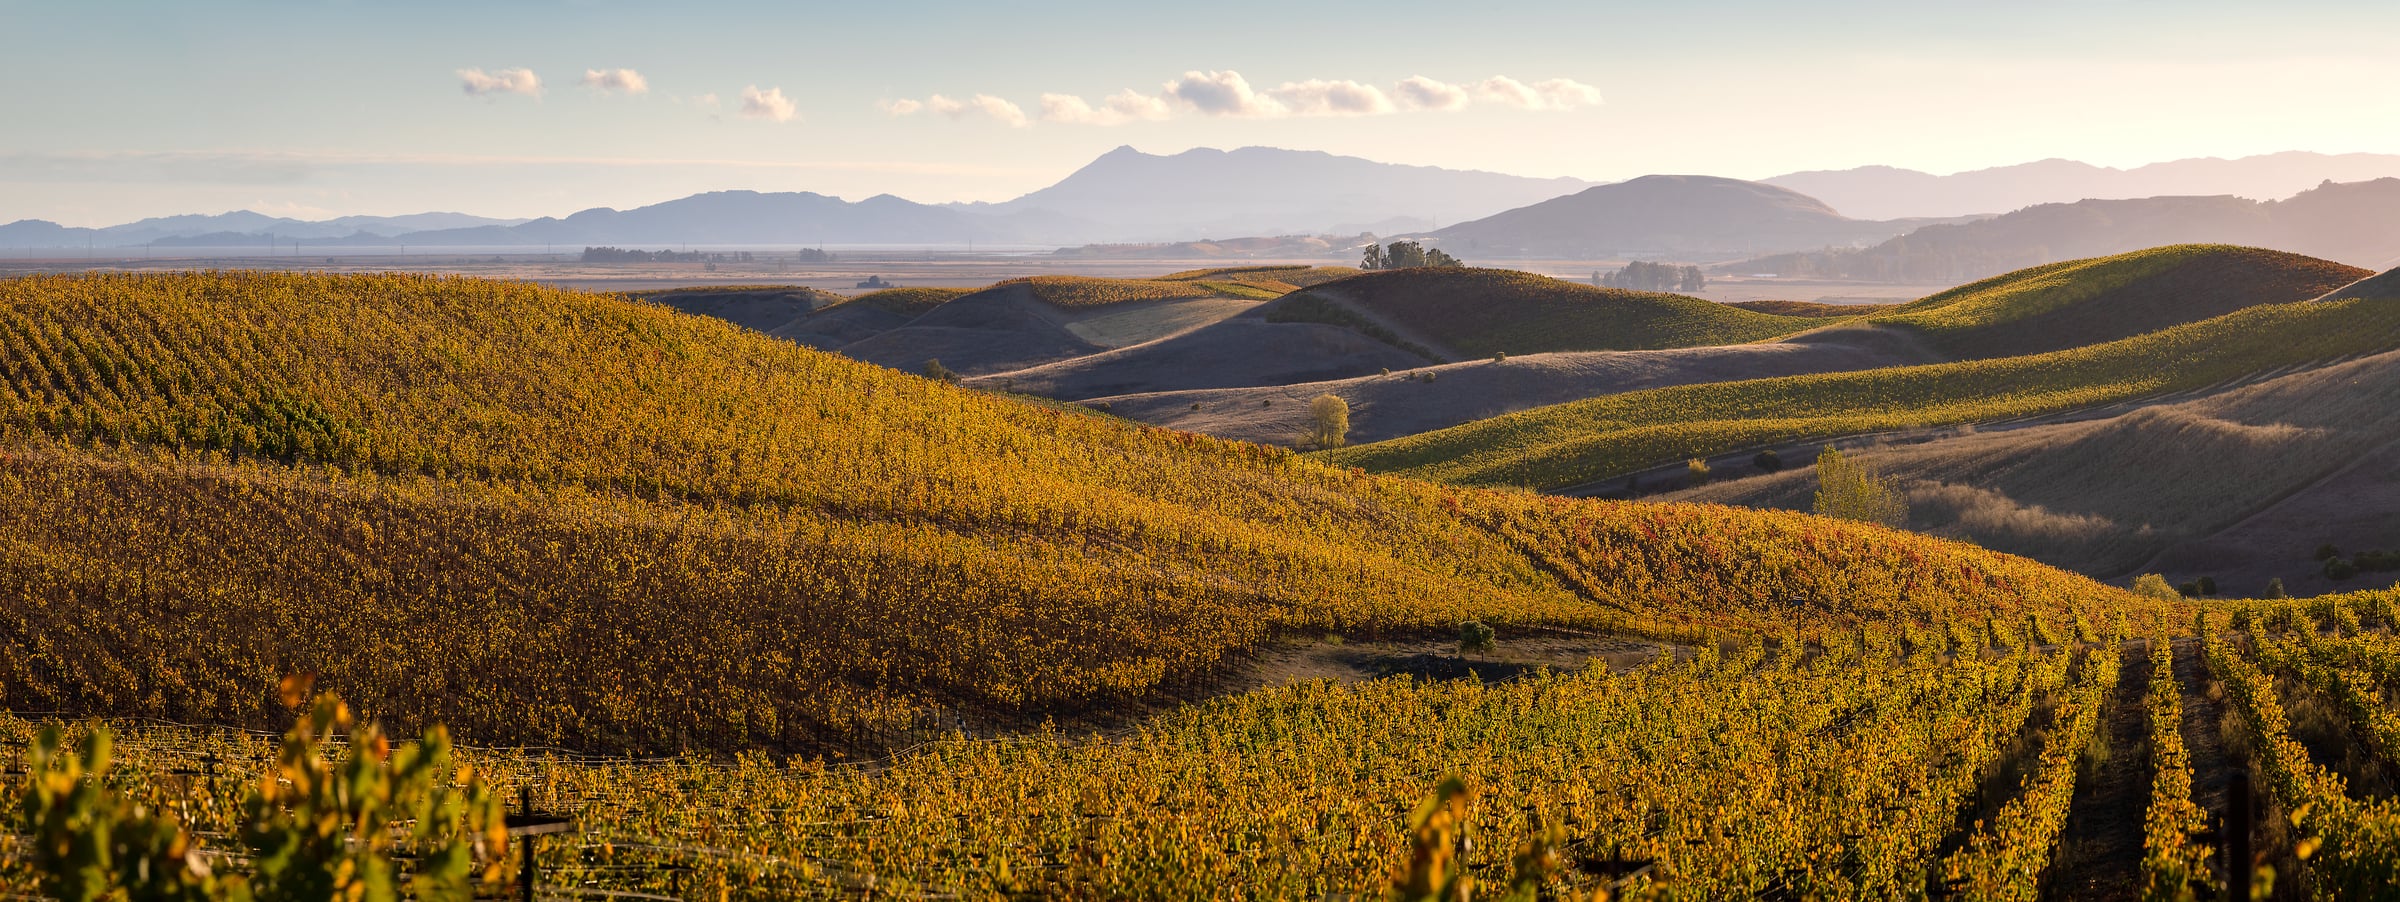 372 megapixels! A very high resolution, large-format VAST photo print of rolling hills with vineyards and mountains in the distance; landscape photograph created by Jeff Lewis in Sonoma, California.